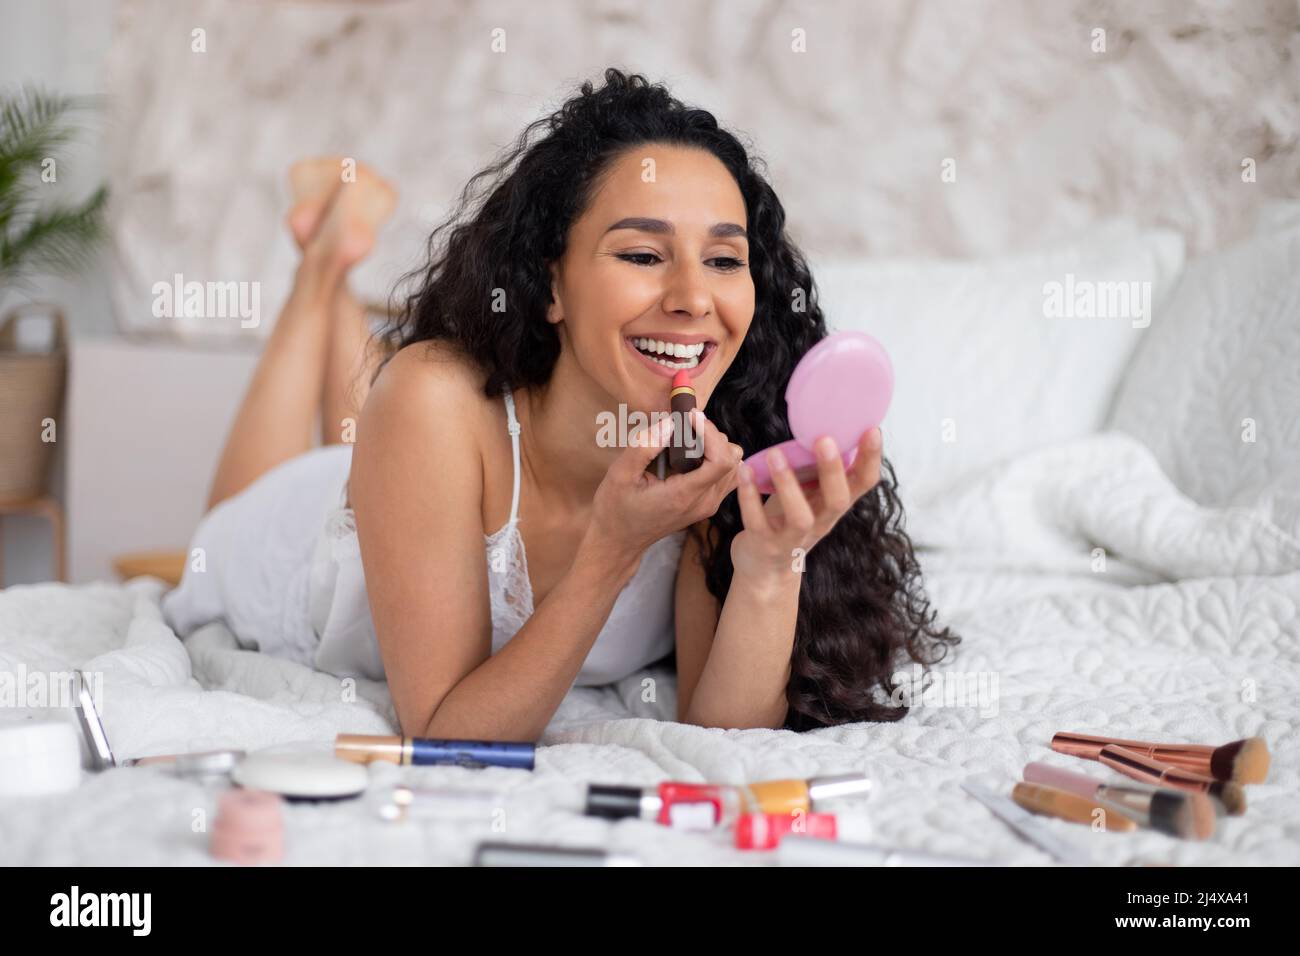 Cheerful young caucasian brunette woman with long curly hair in pajamas lies on bed and puts lipstick on lips Stock Photo